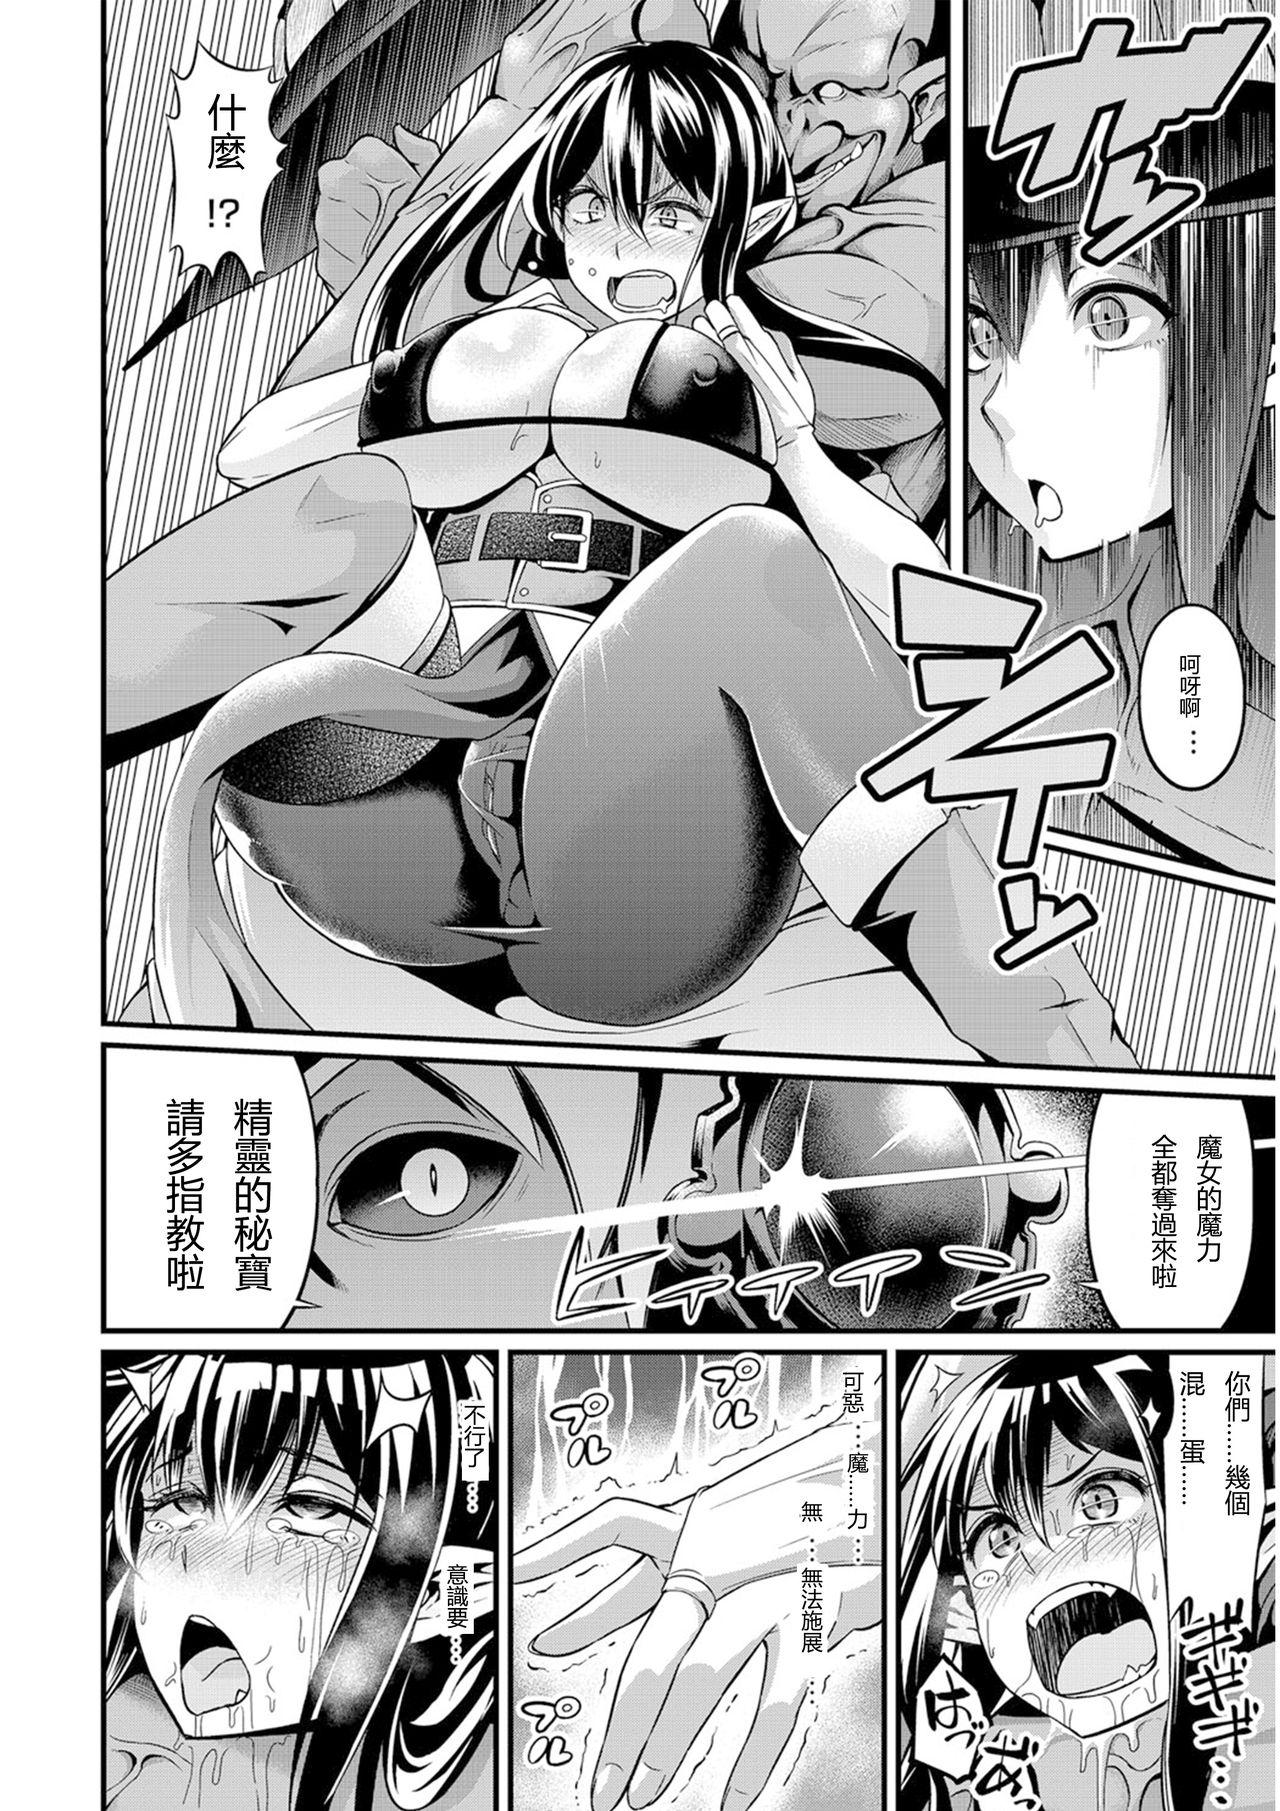 Jav Witch down strike | 魔女墮落 Gay Ass Fucking - Page 6